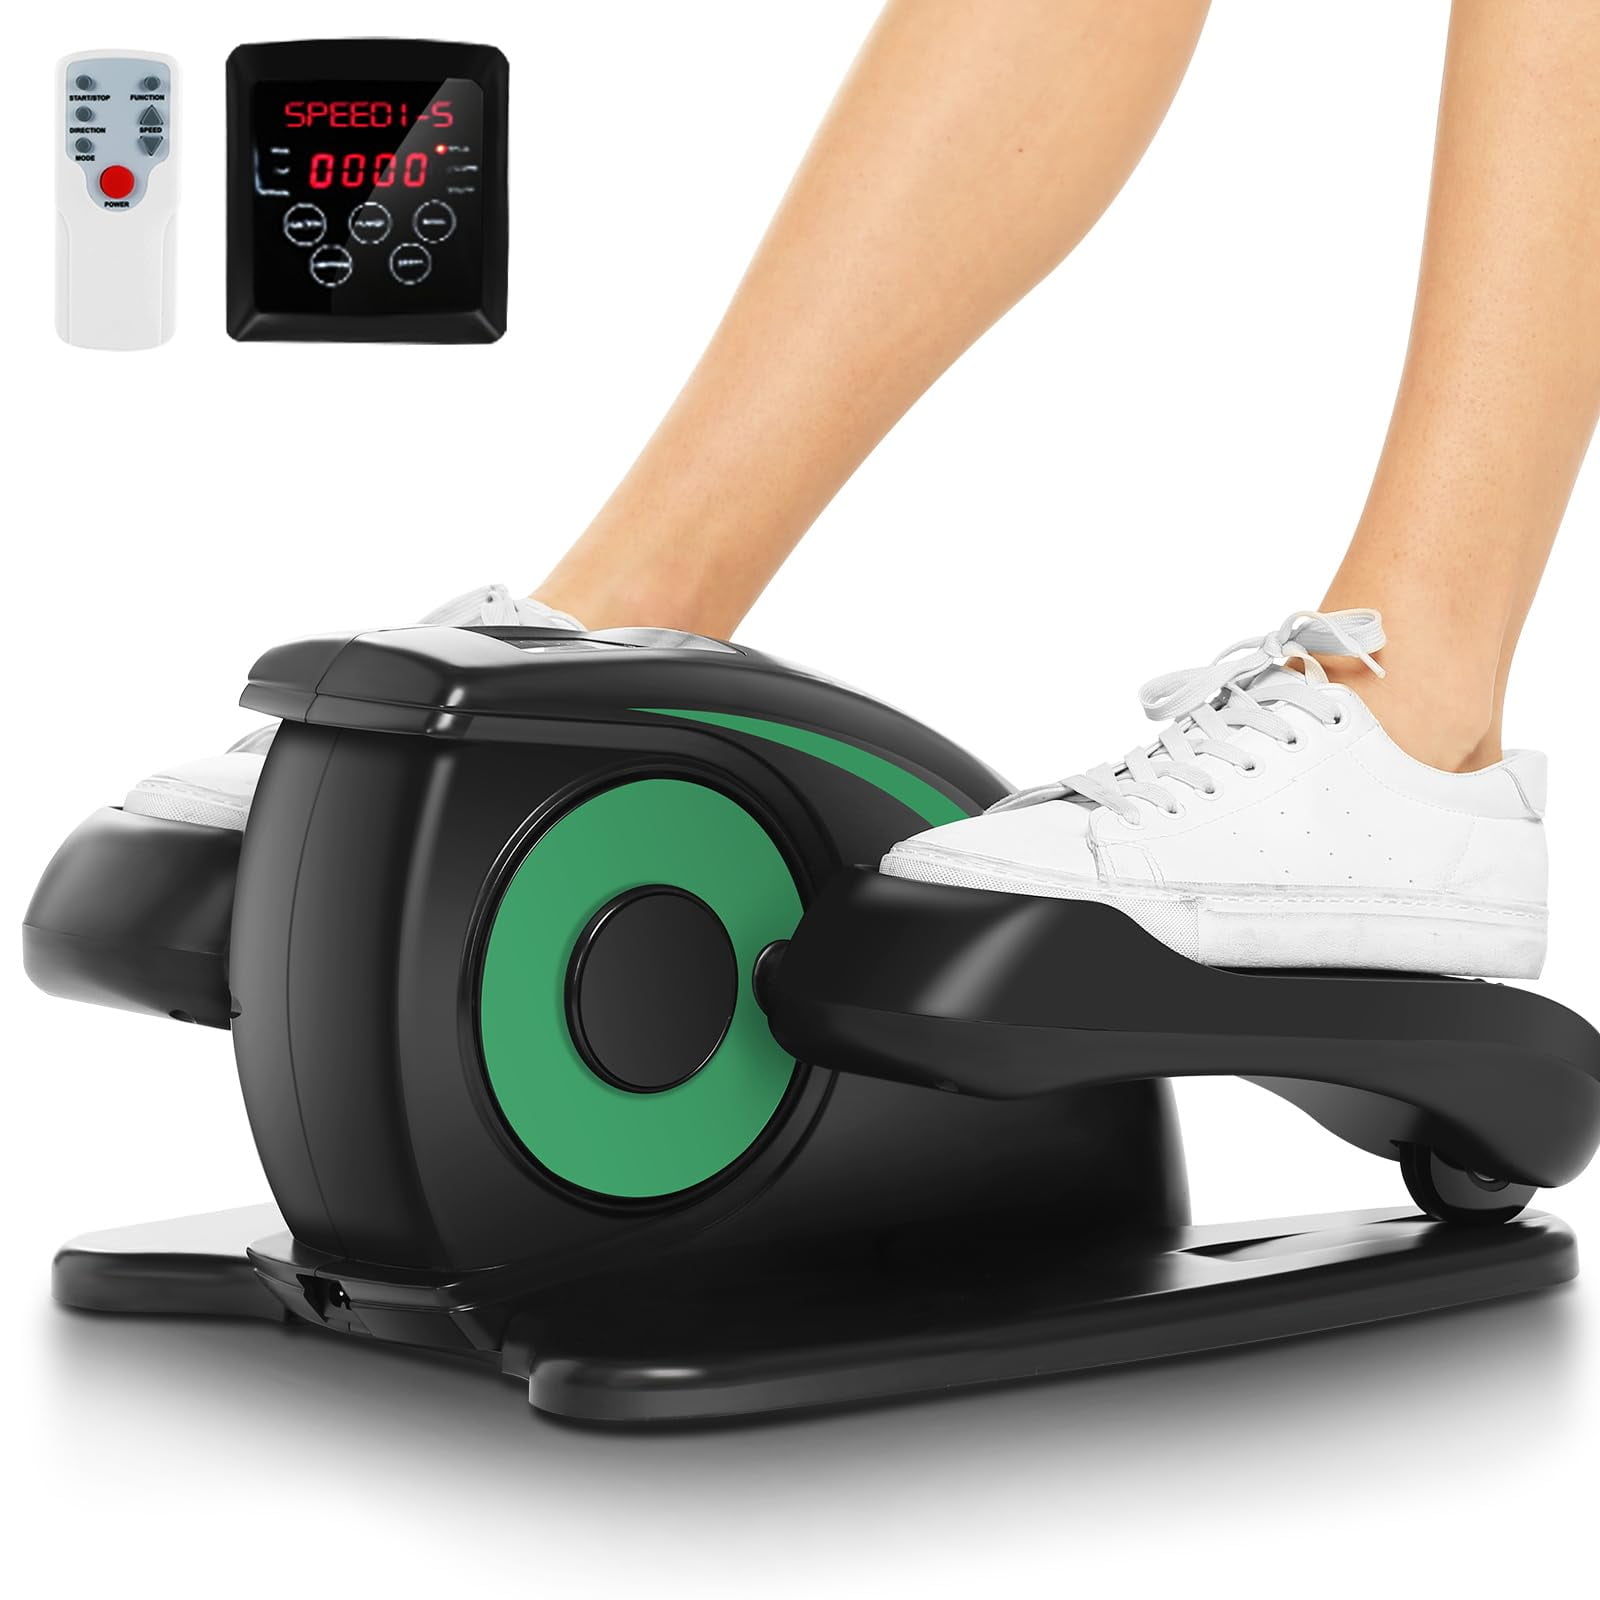 ANCHEER Under Desk Elliptical Machine, Electric Seated Pedal Exerciser,  Remote Control Portable Exercise Elliptical Trainer - AliExpress